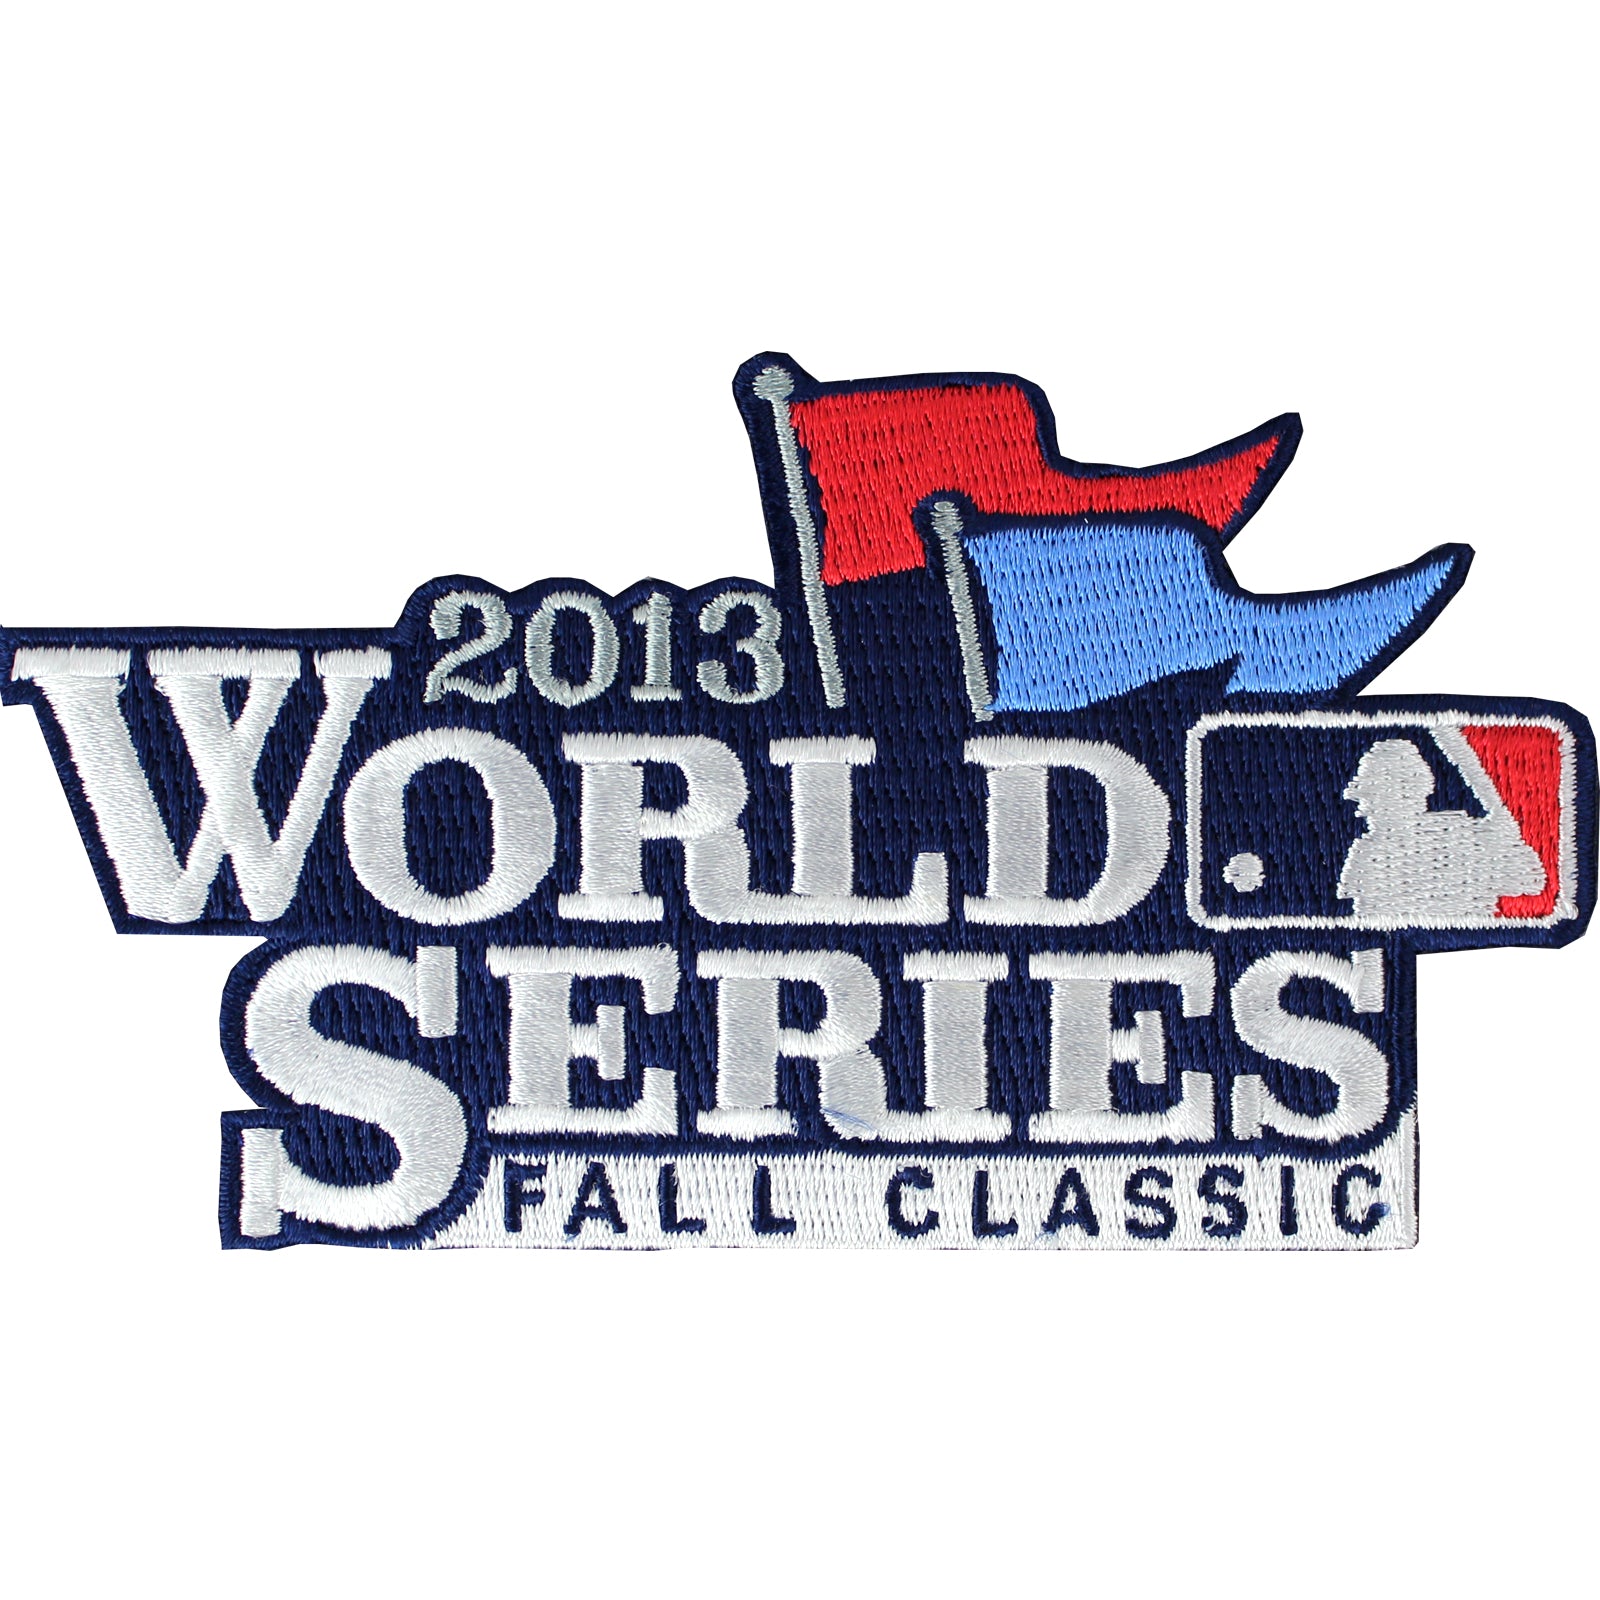 red sox world series logo images